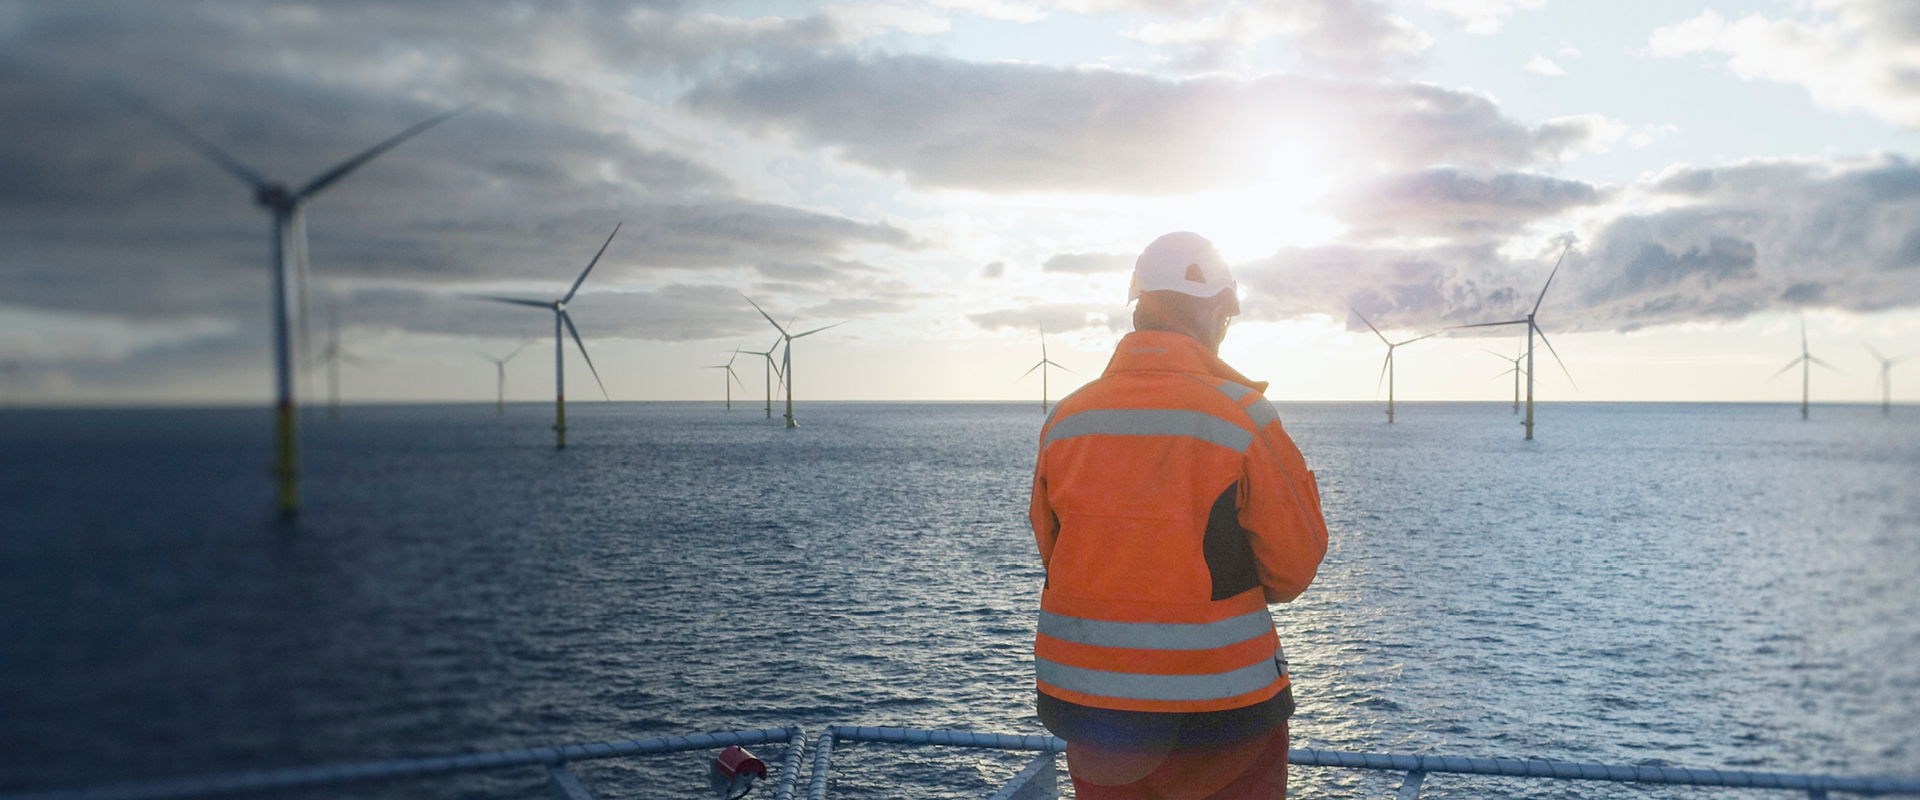 Whitepaper: Learn About the Sustainability and Offshore Wind Farm Construction